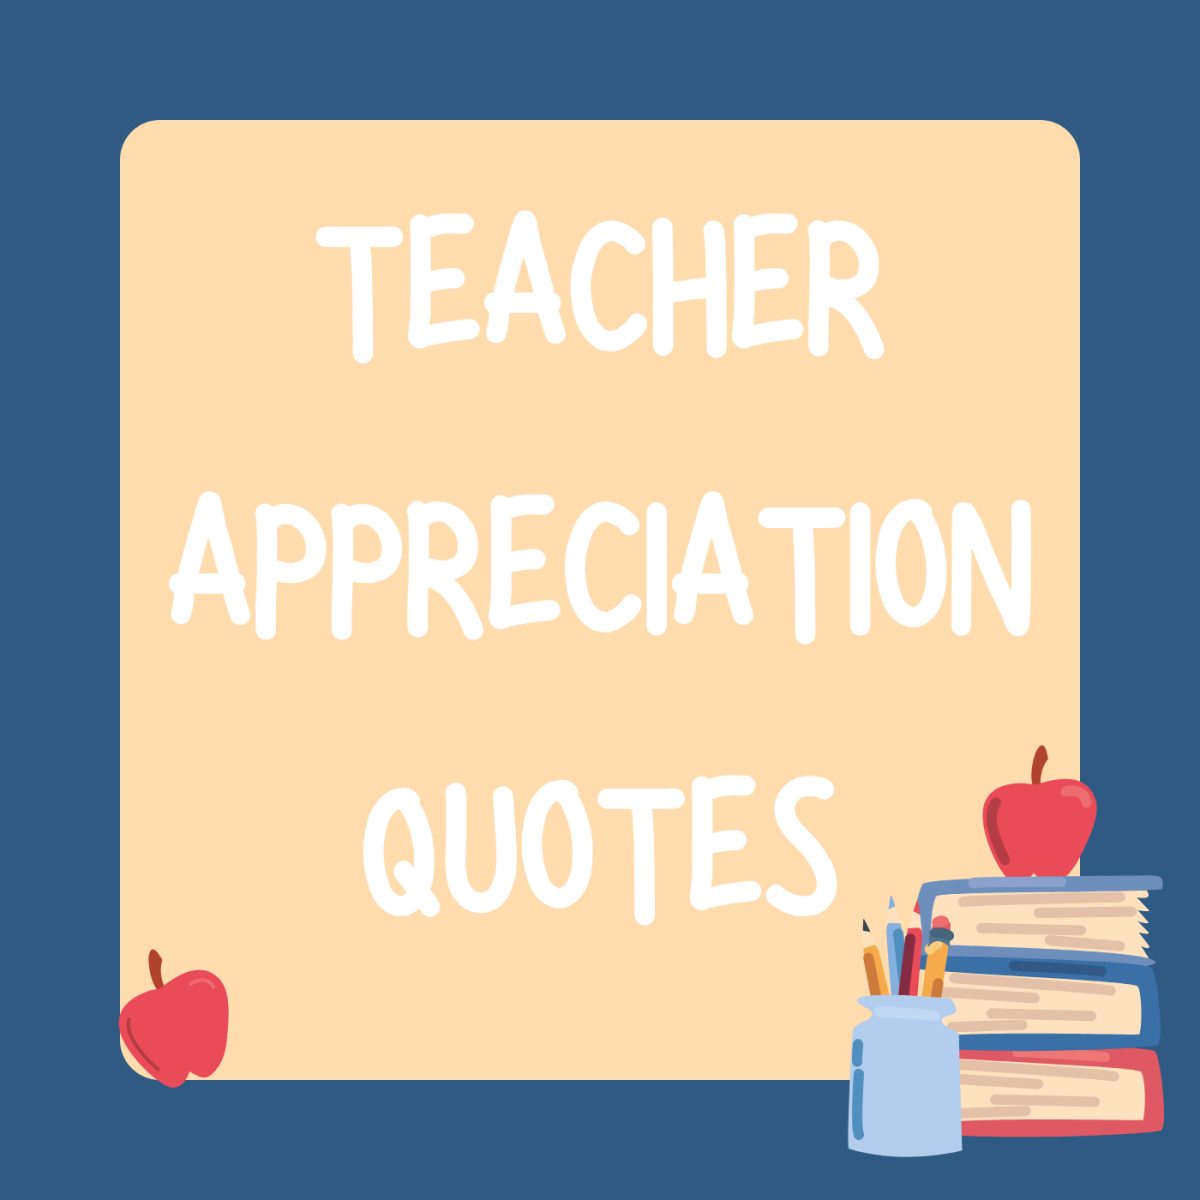 40 Teacher Appreciation Quotes for Every Day